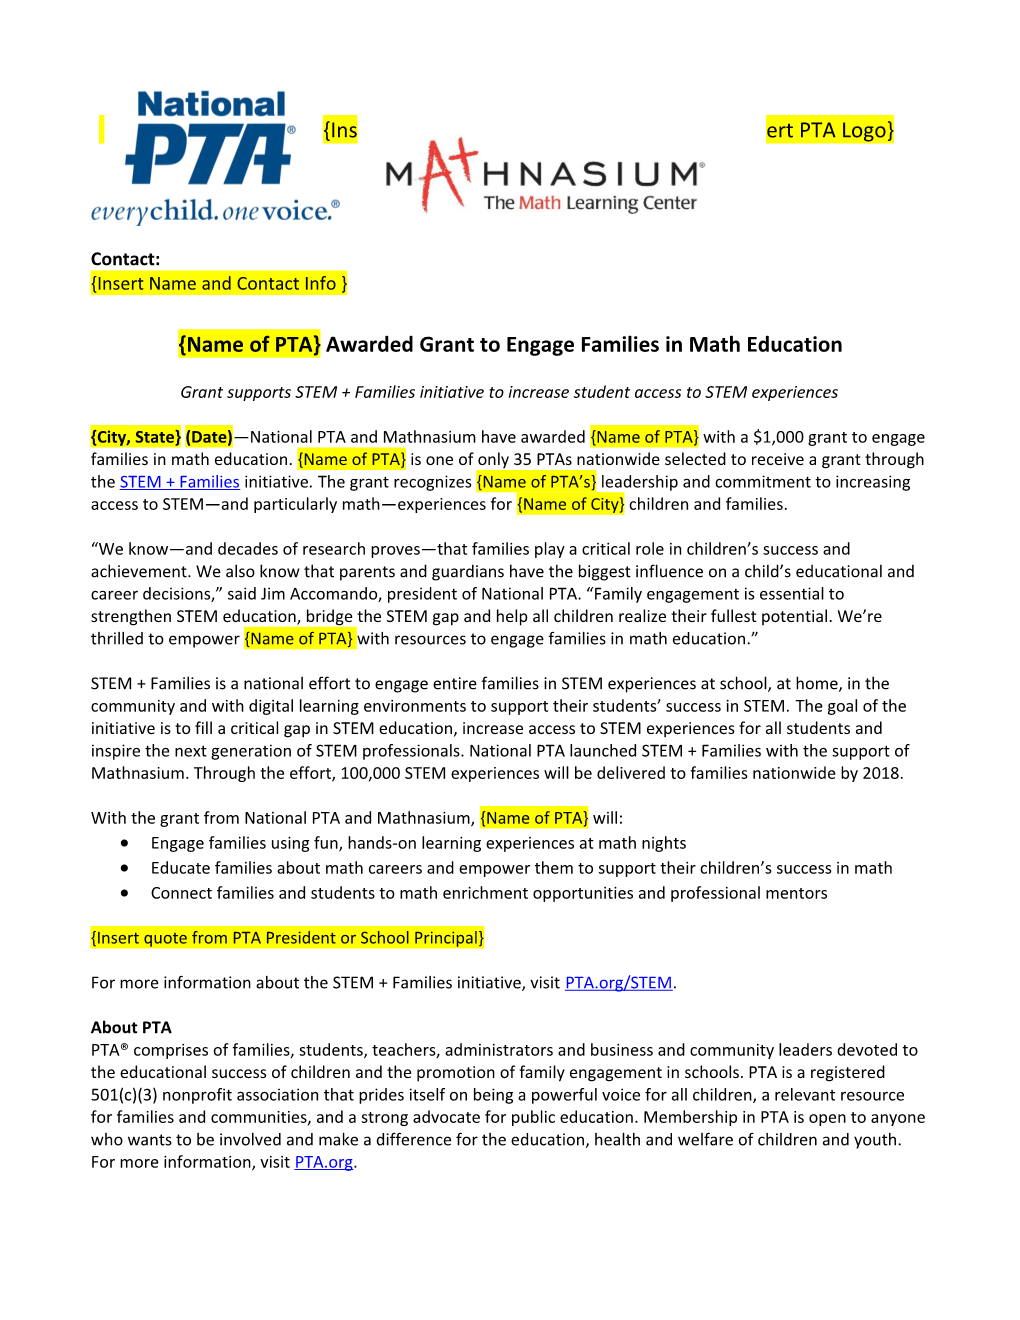 Name of PTA Awarded Grantto Engage Families in Math Education